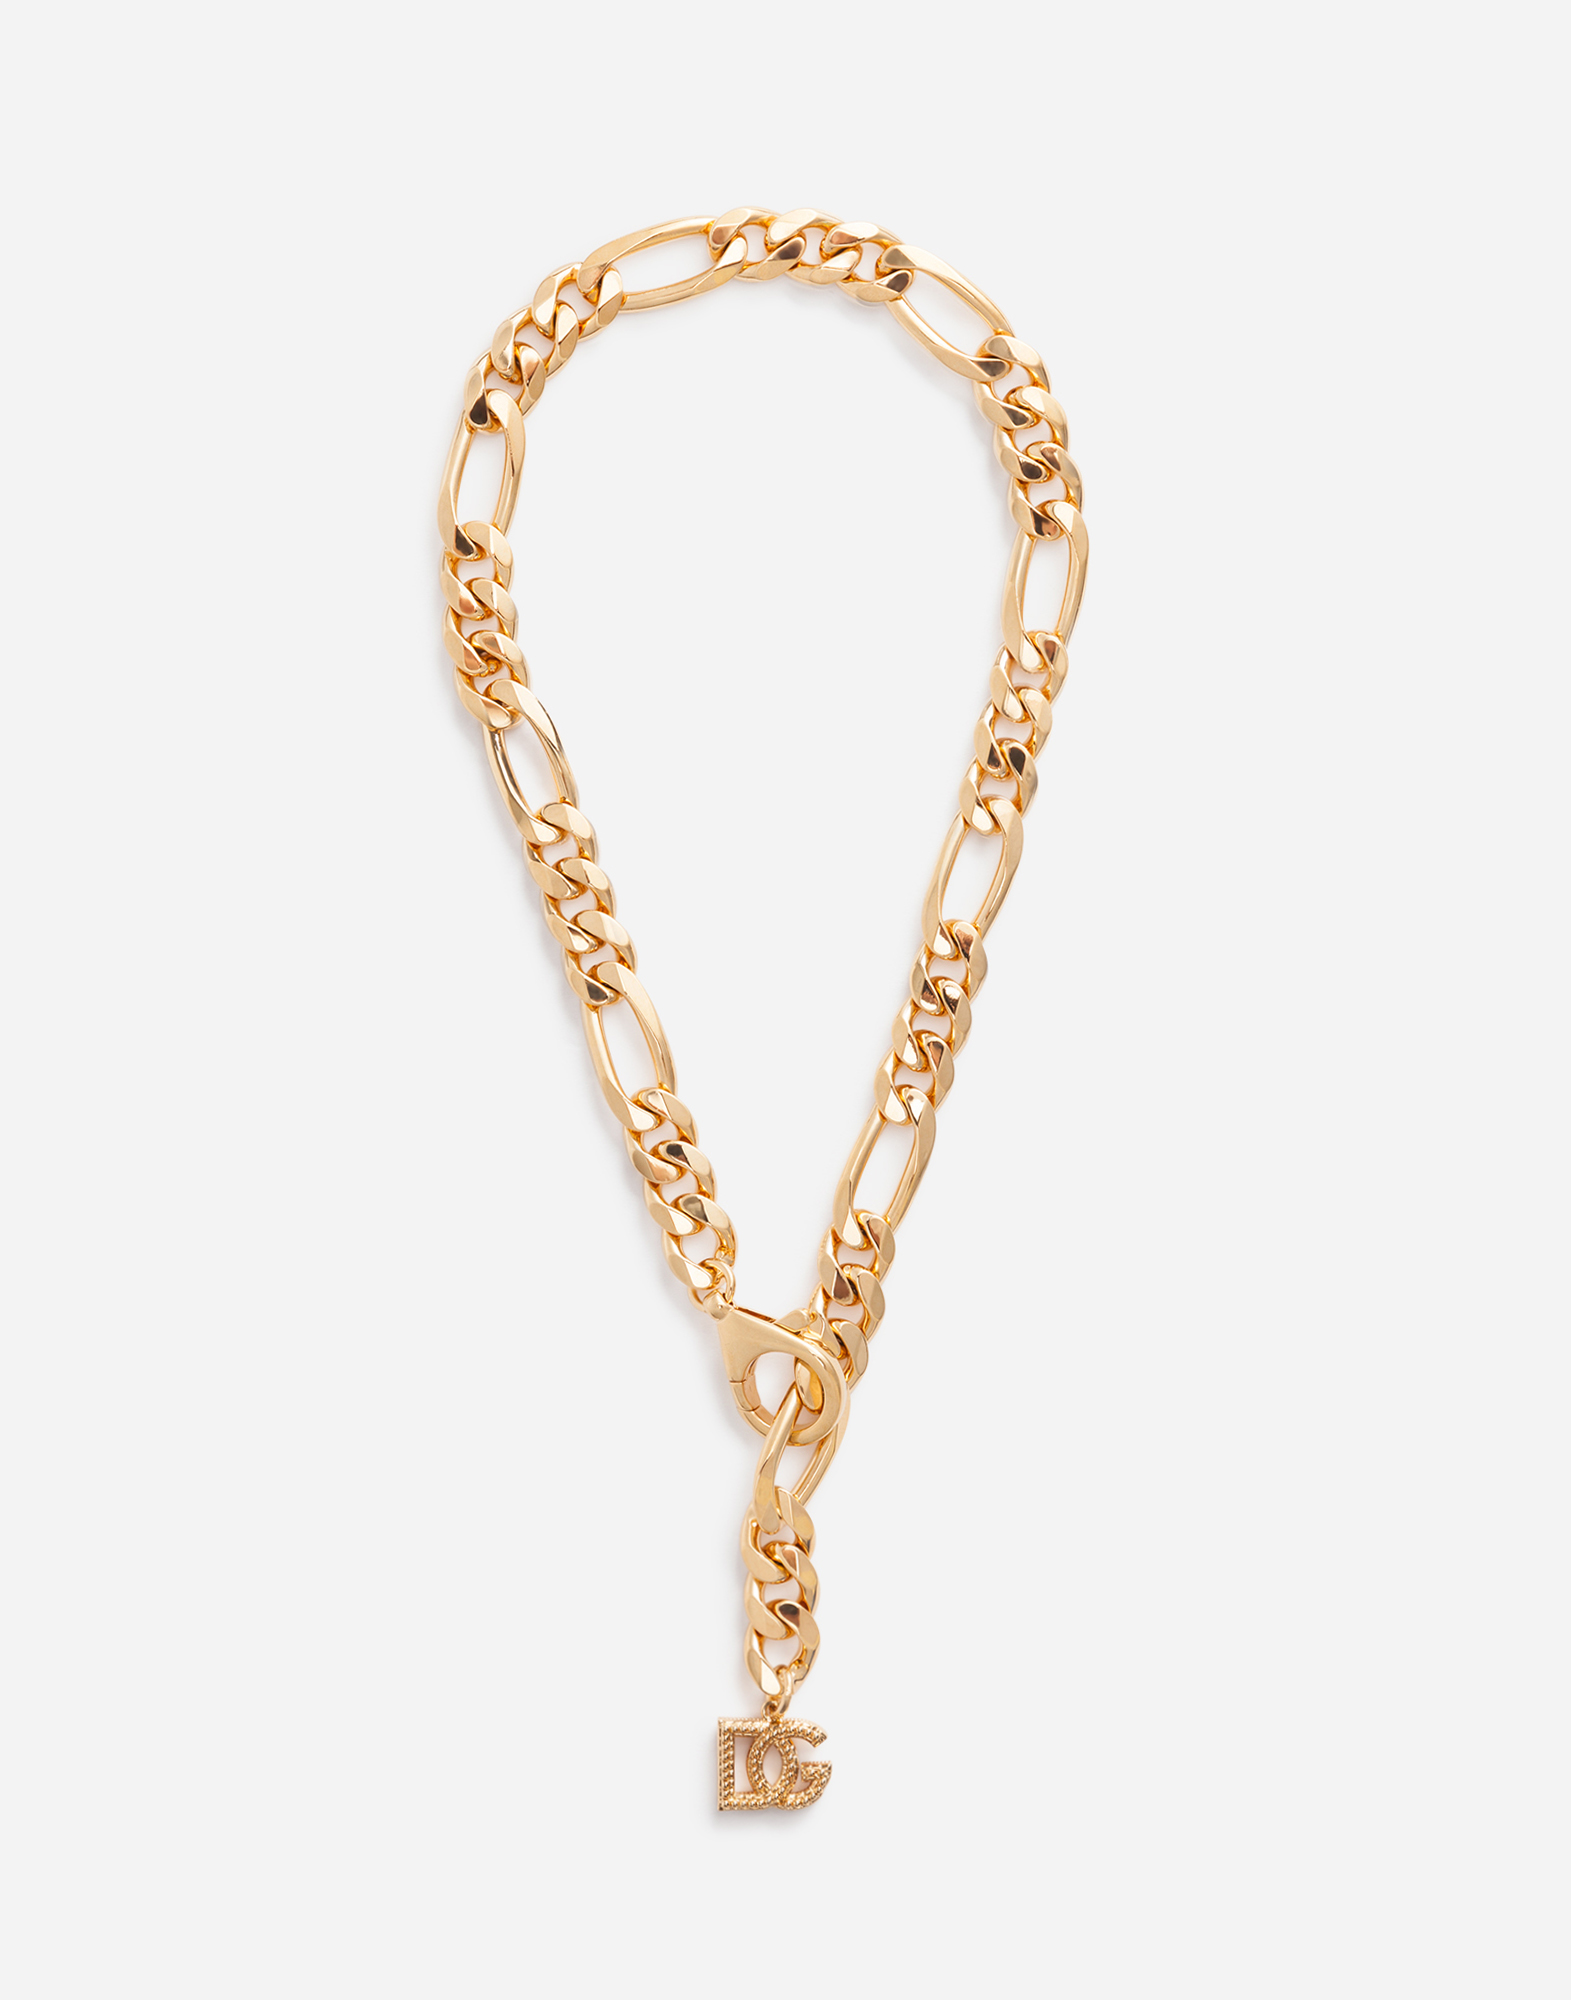 DOLCE & GABBANA CHAIN NECKLACE WITH DG LOGO CHARMS